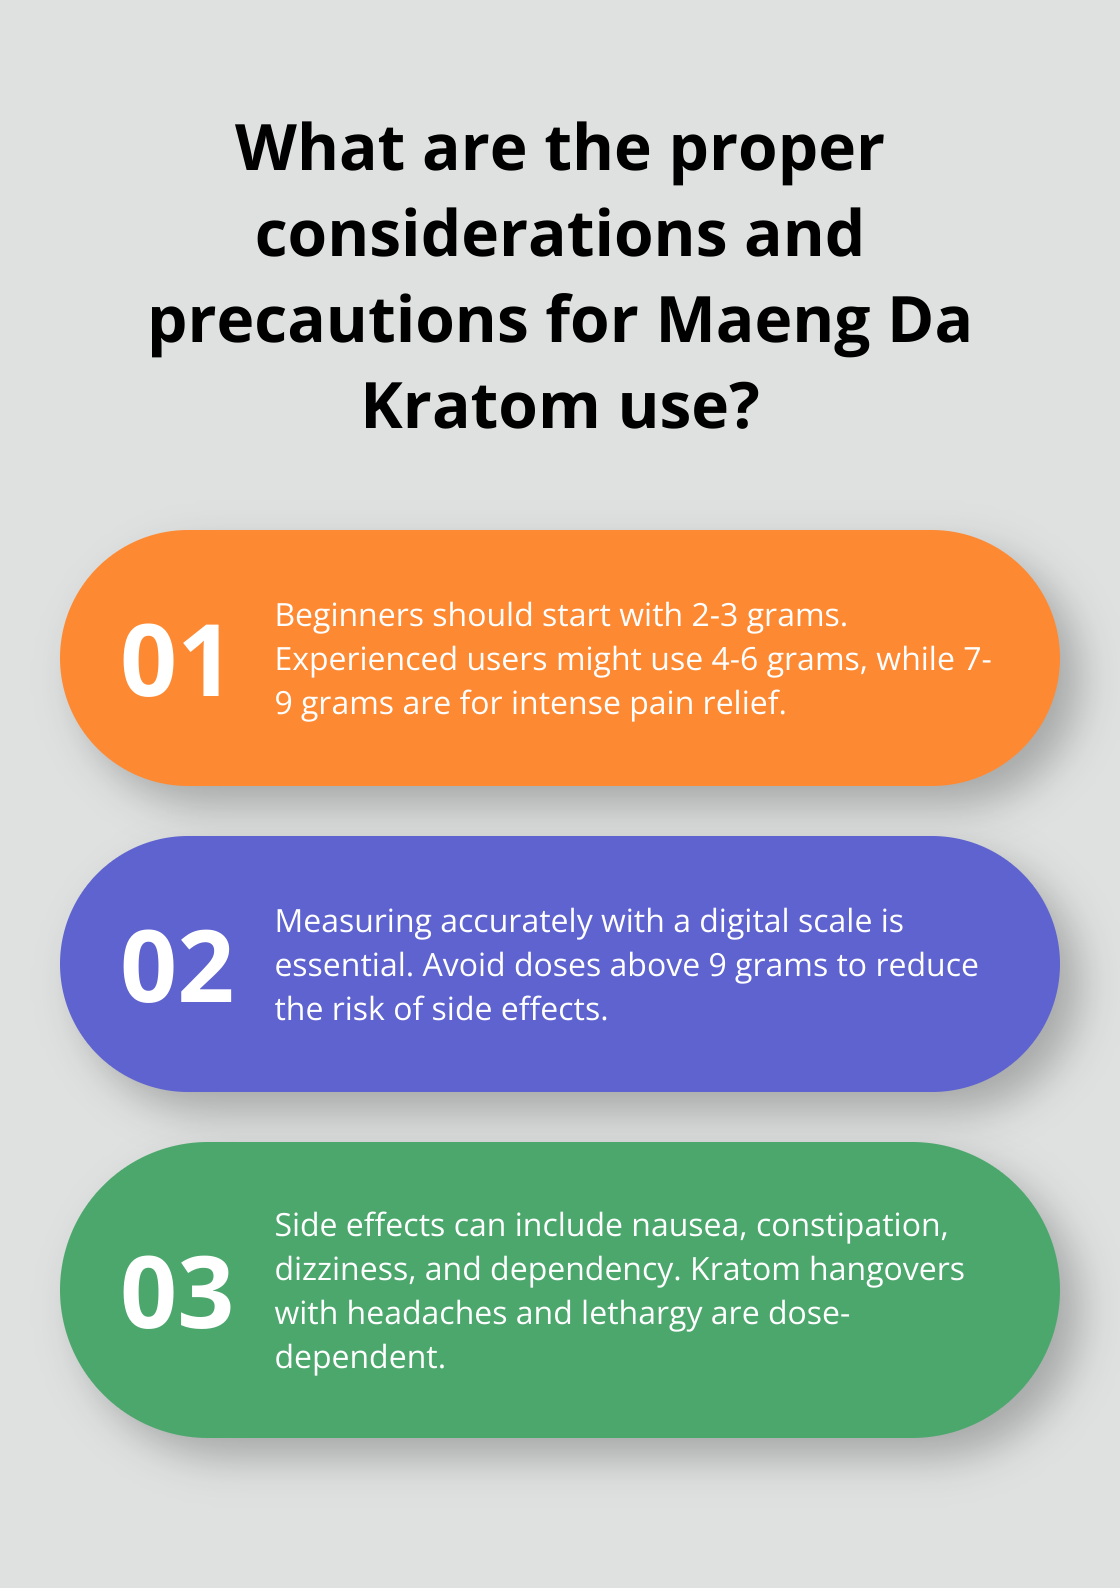 Fact - What are the proper considerations and precautions for Maeng Da Kratom use?